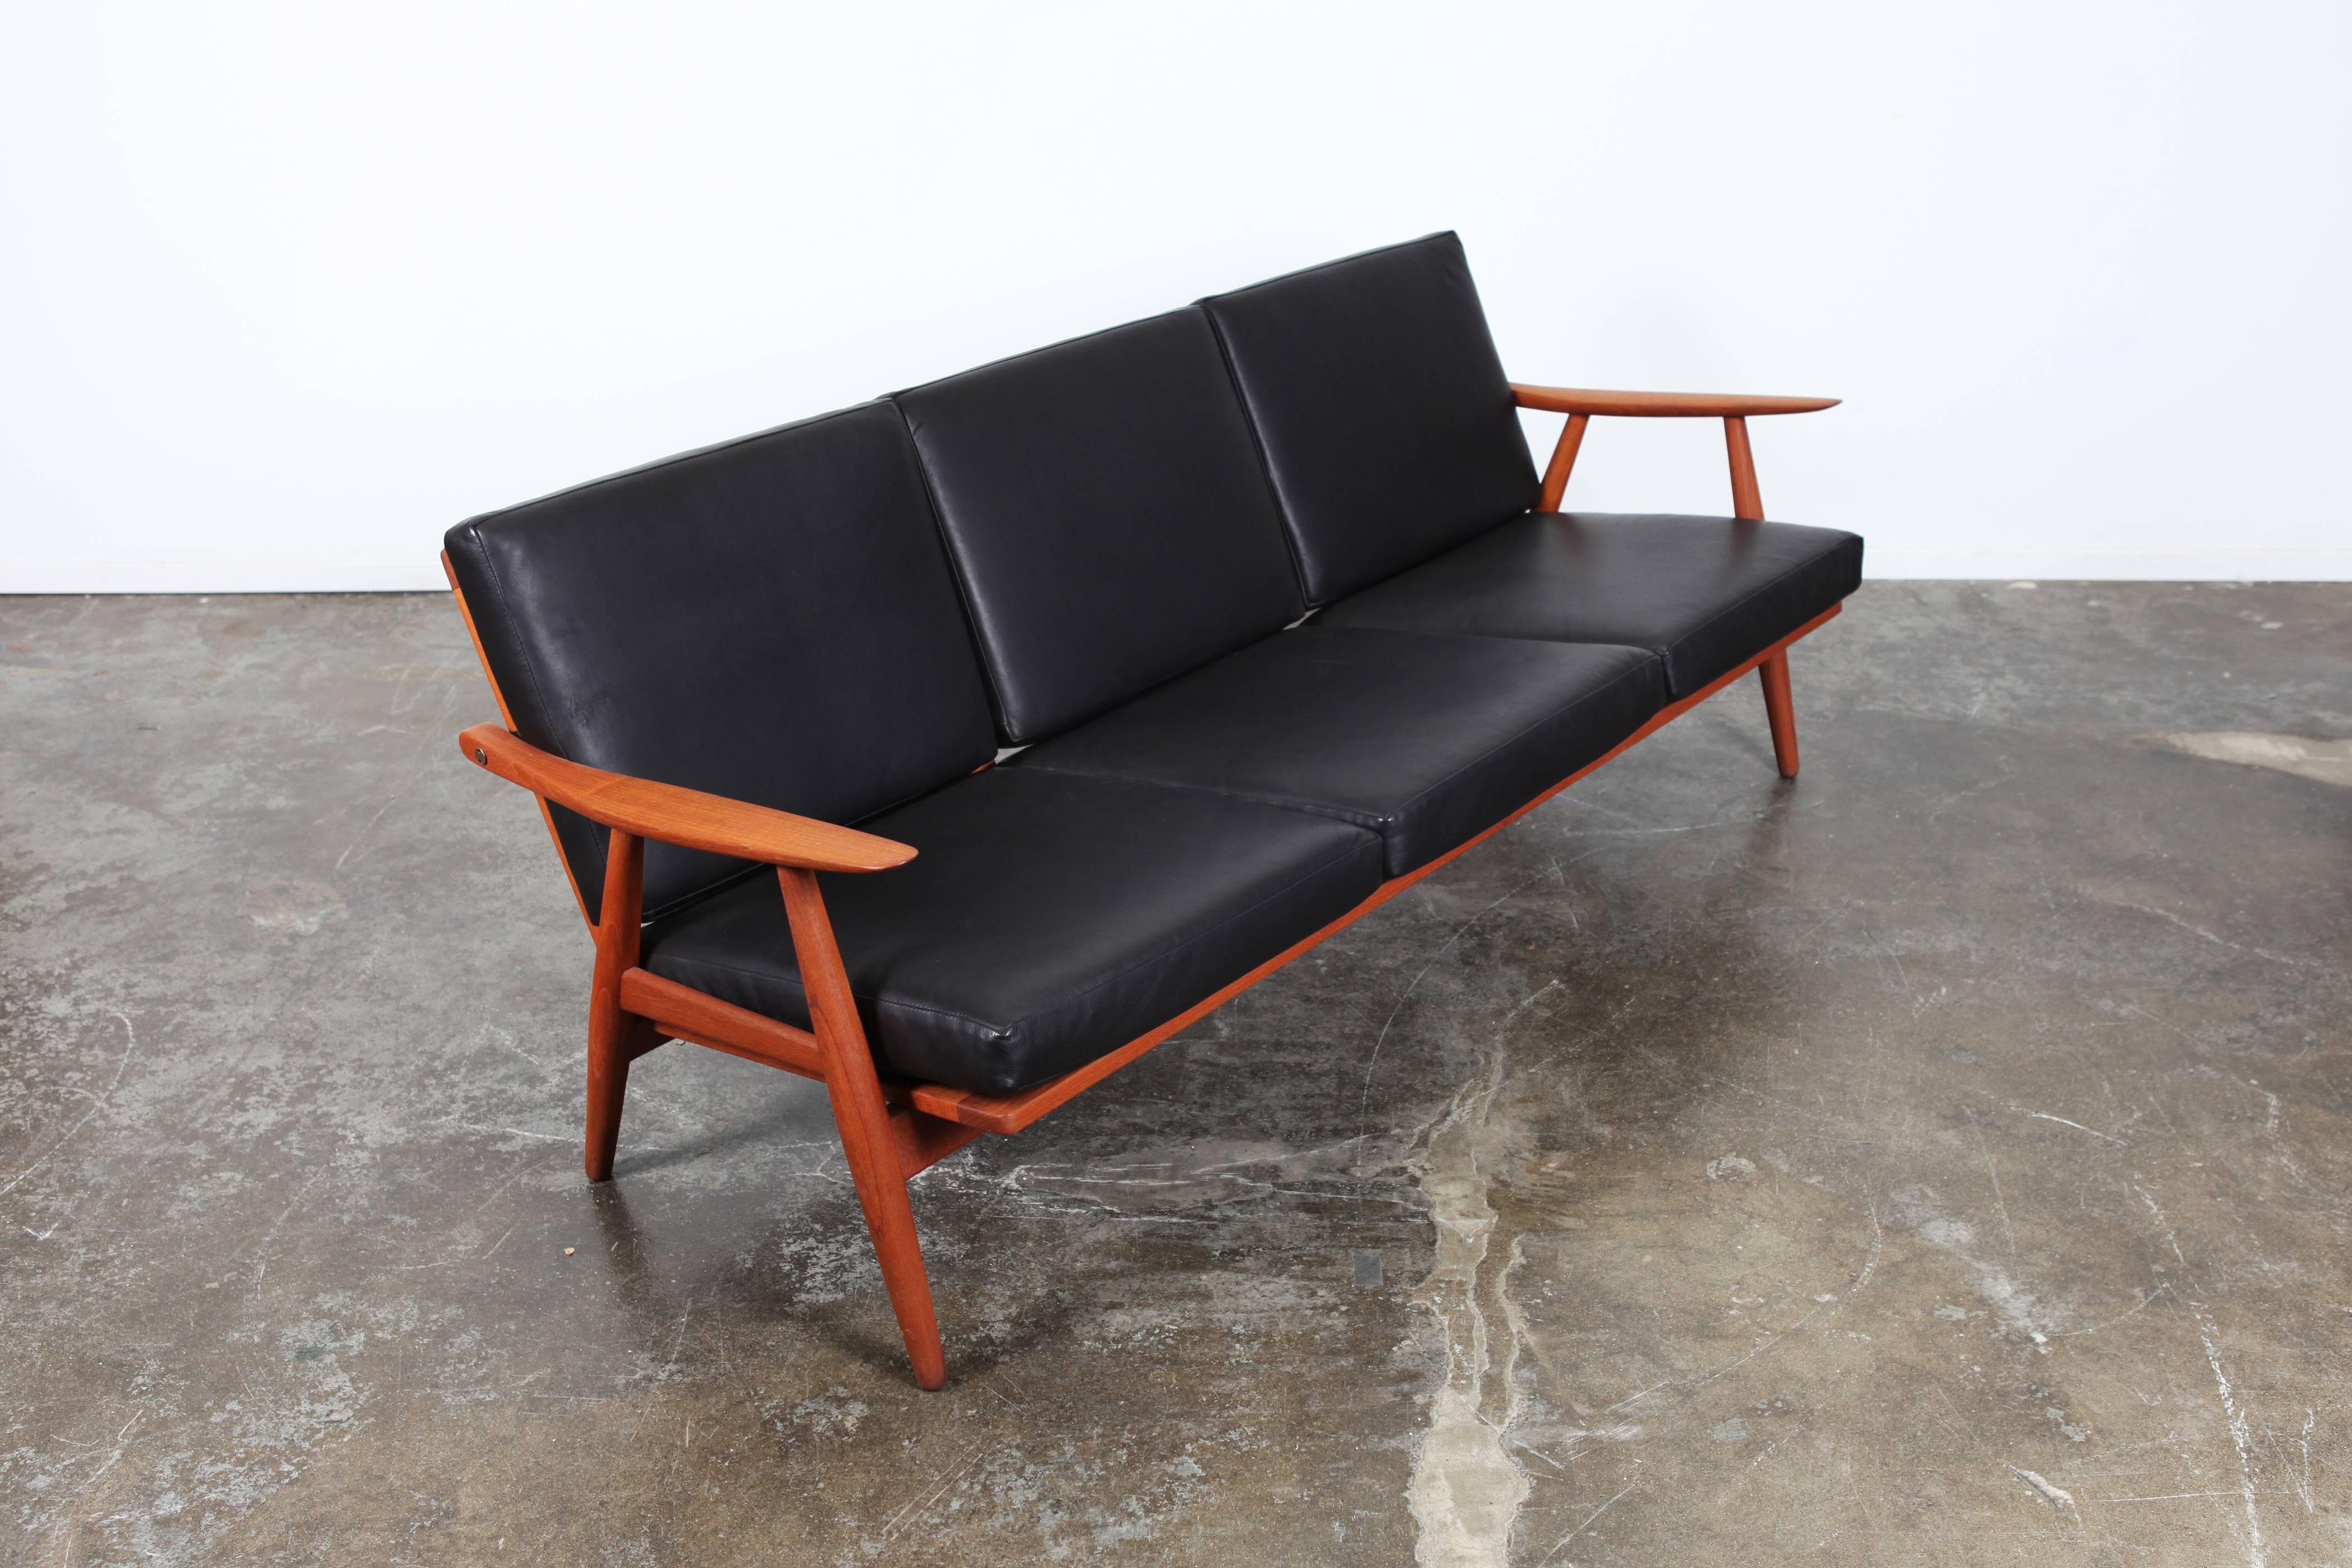 Vintage GE-270 sofa by Hans Wegner for GETAMA, circa 1960s. A Classic design, it's recognizable by its sleek, curved arms and attractively angled rear legs. Newly upholstered in black leather with teak construction.